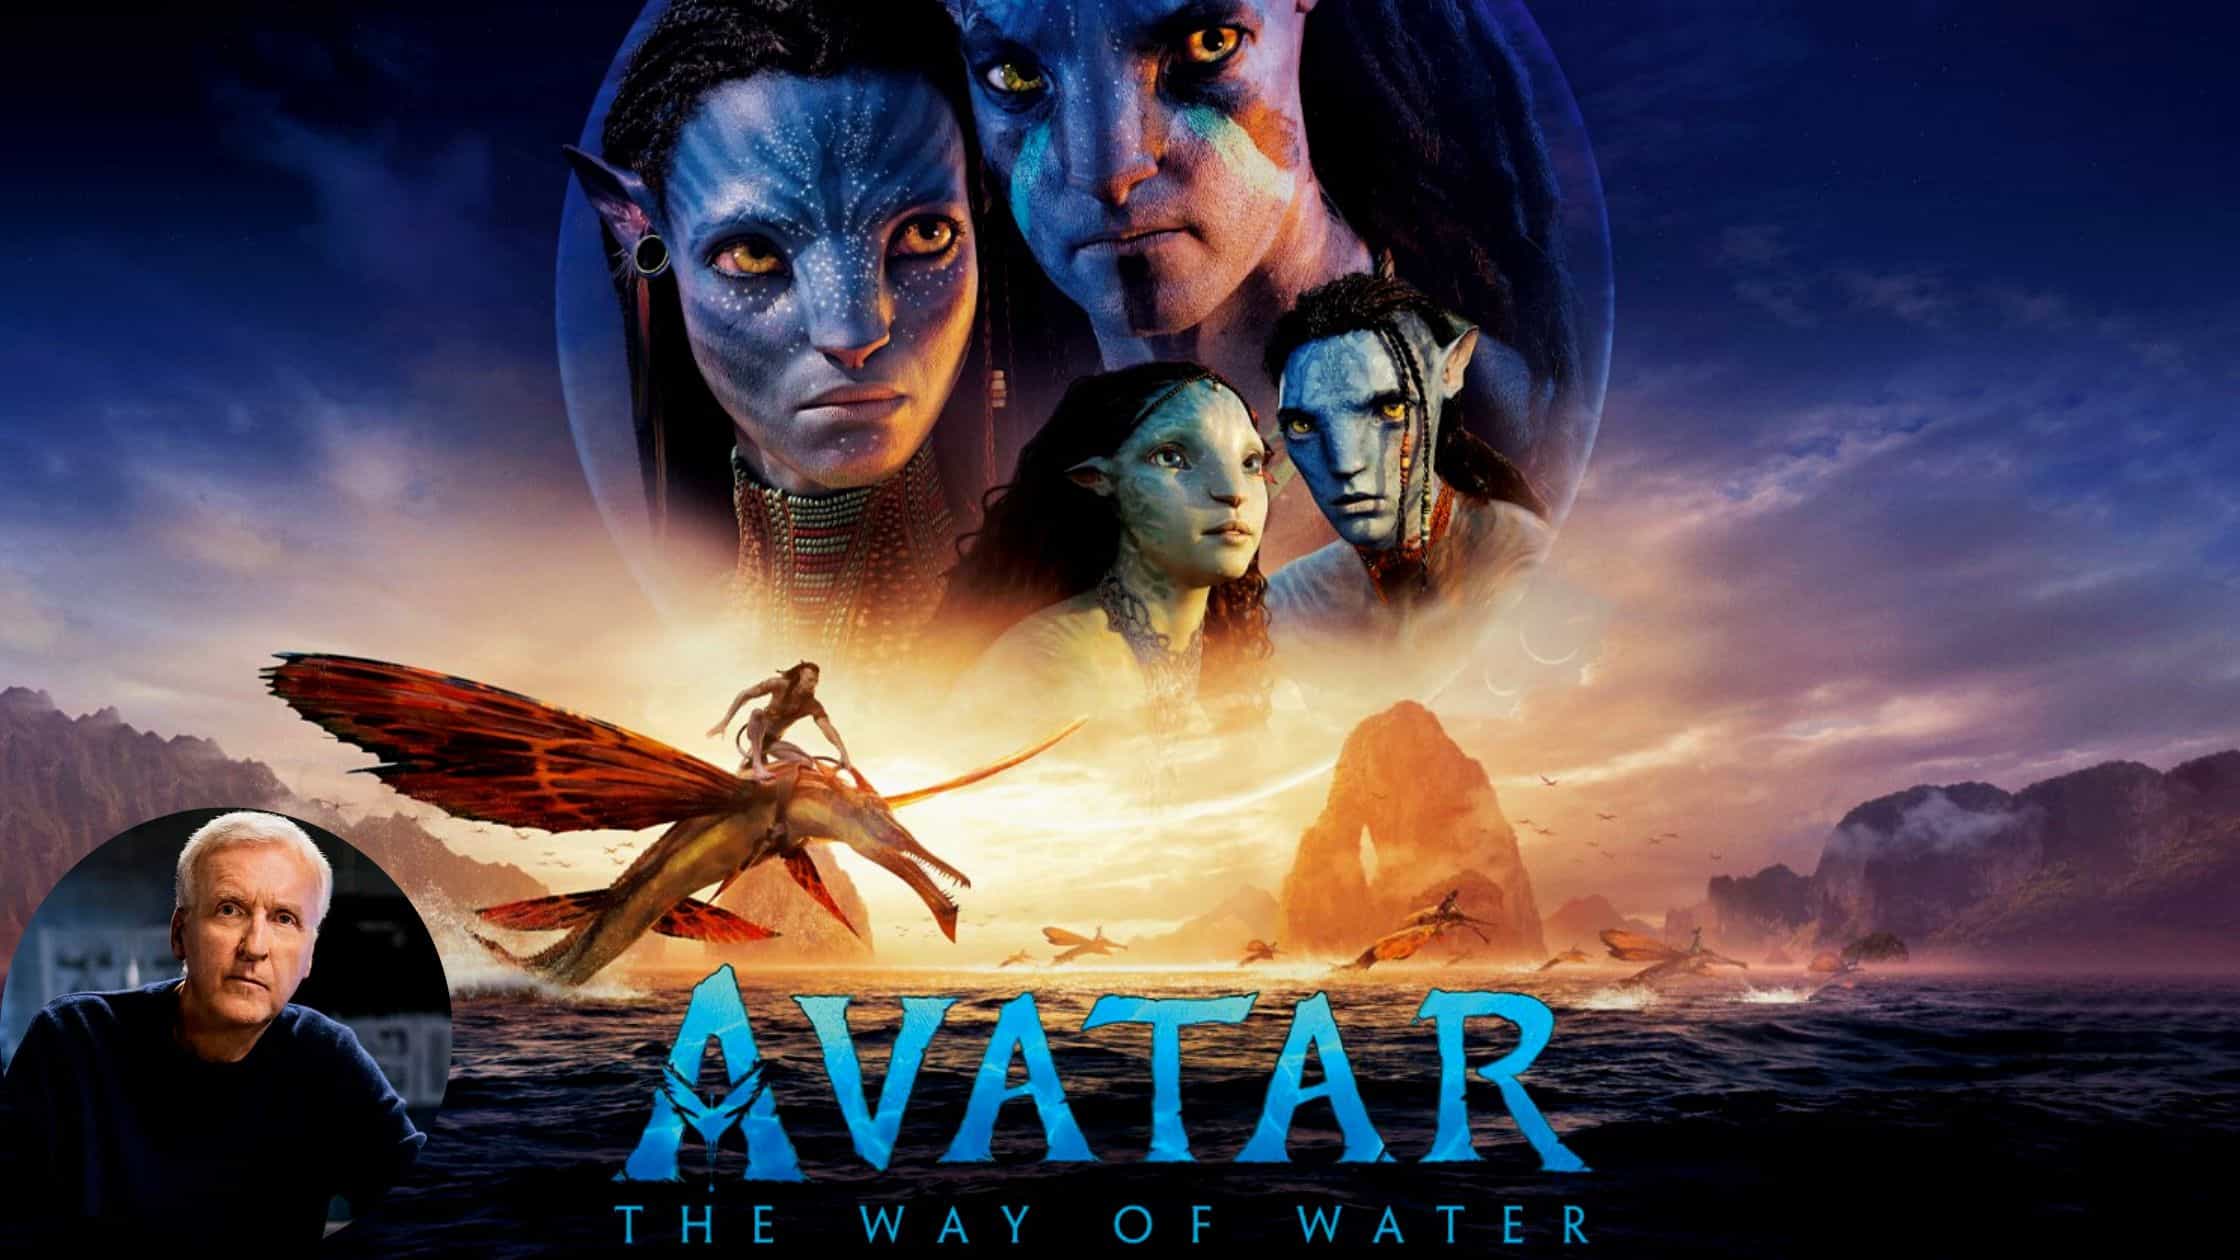 Reactions To Avatar The Way Of Water Is Described As Immersive, Spectacular, And Better Than First Movie